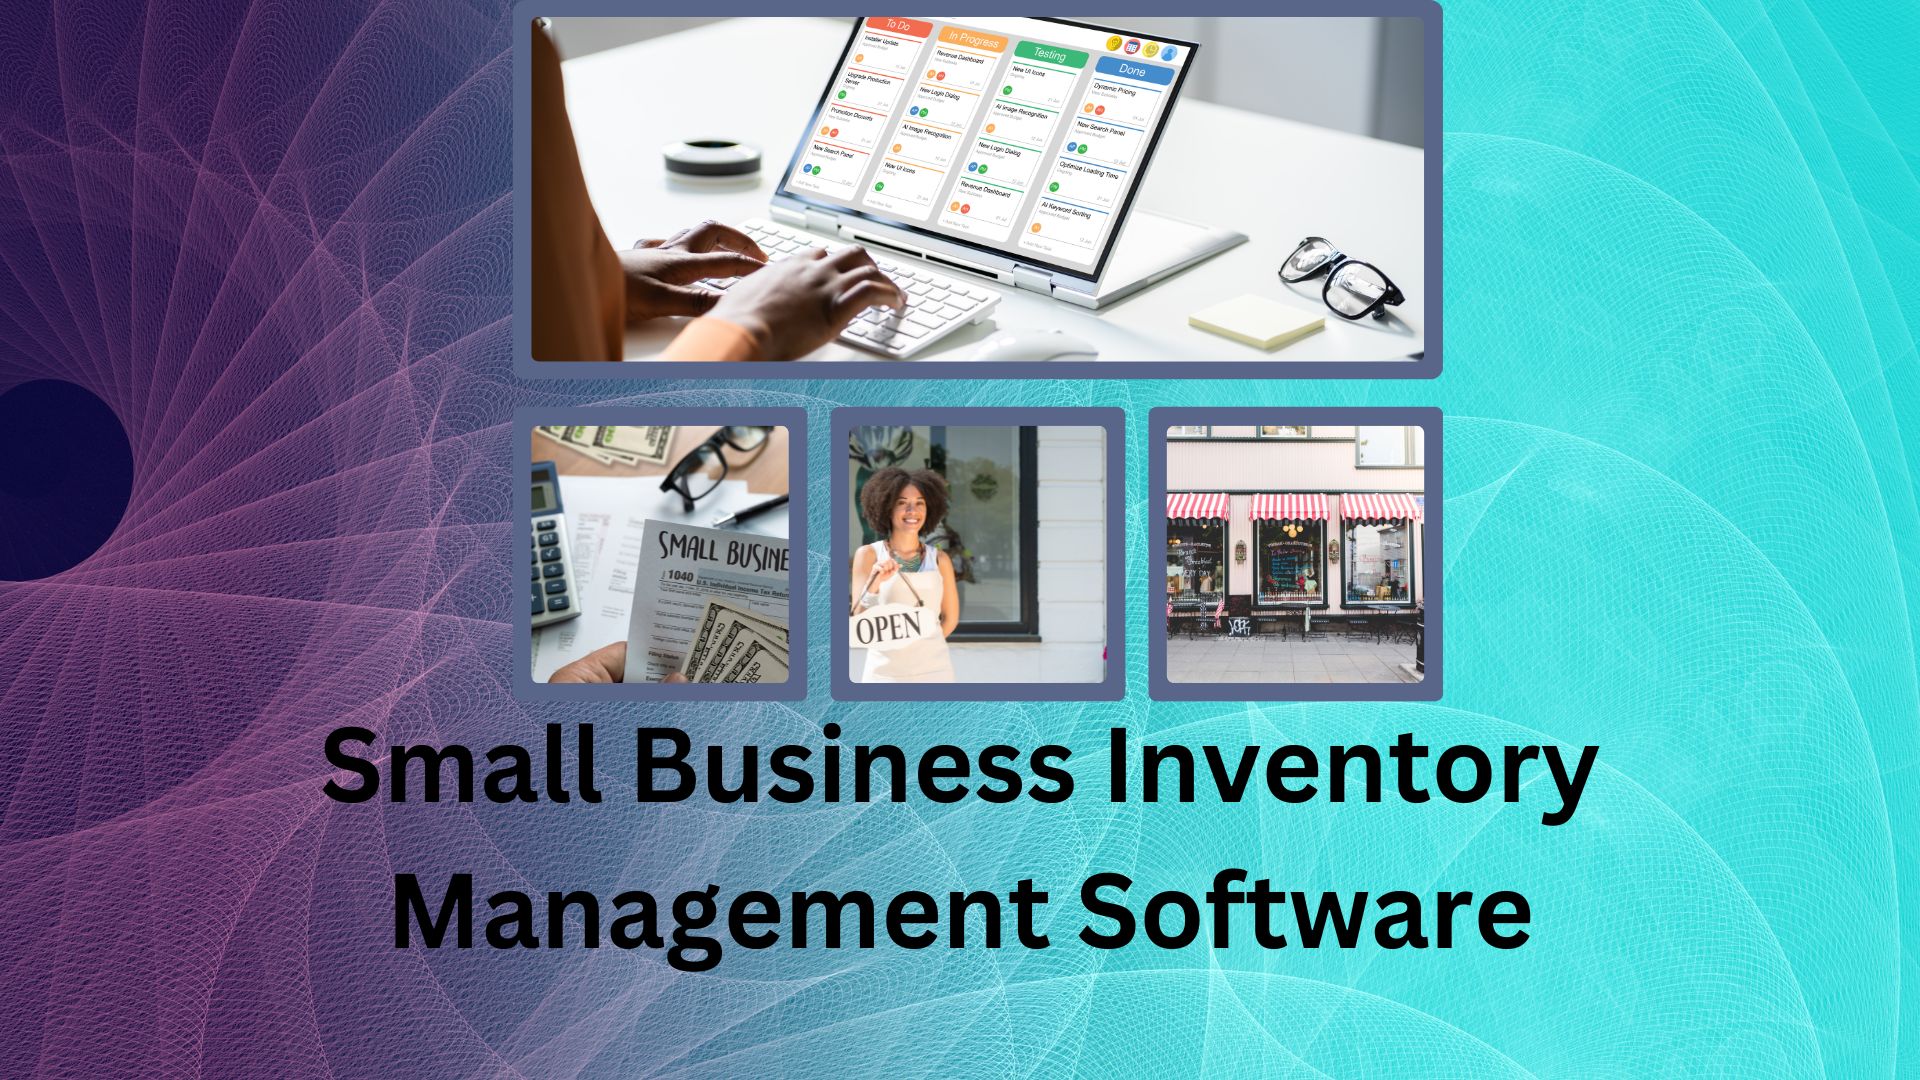 Small Business Inventory Management Software